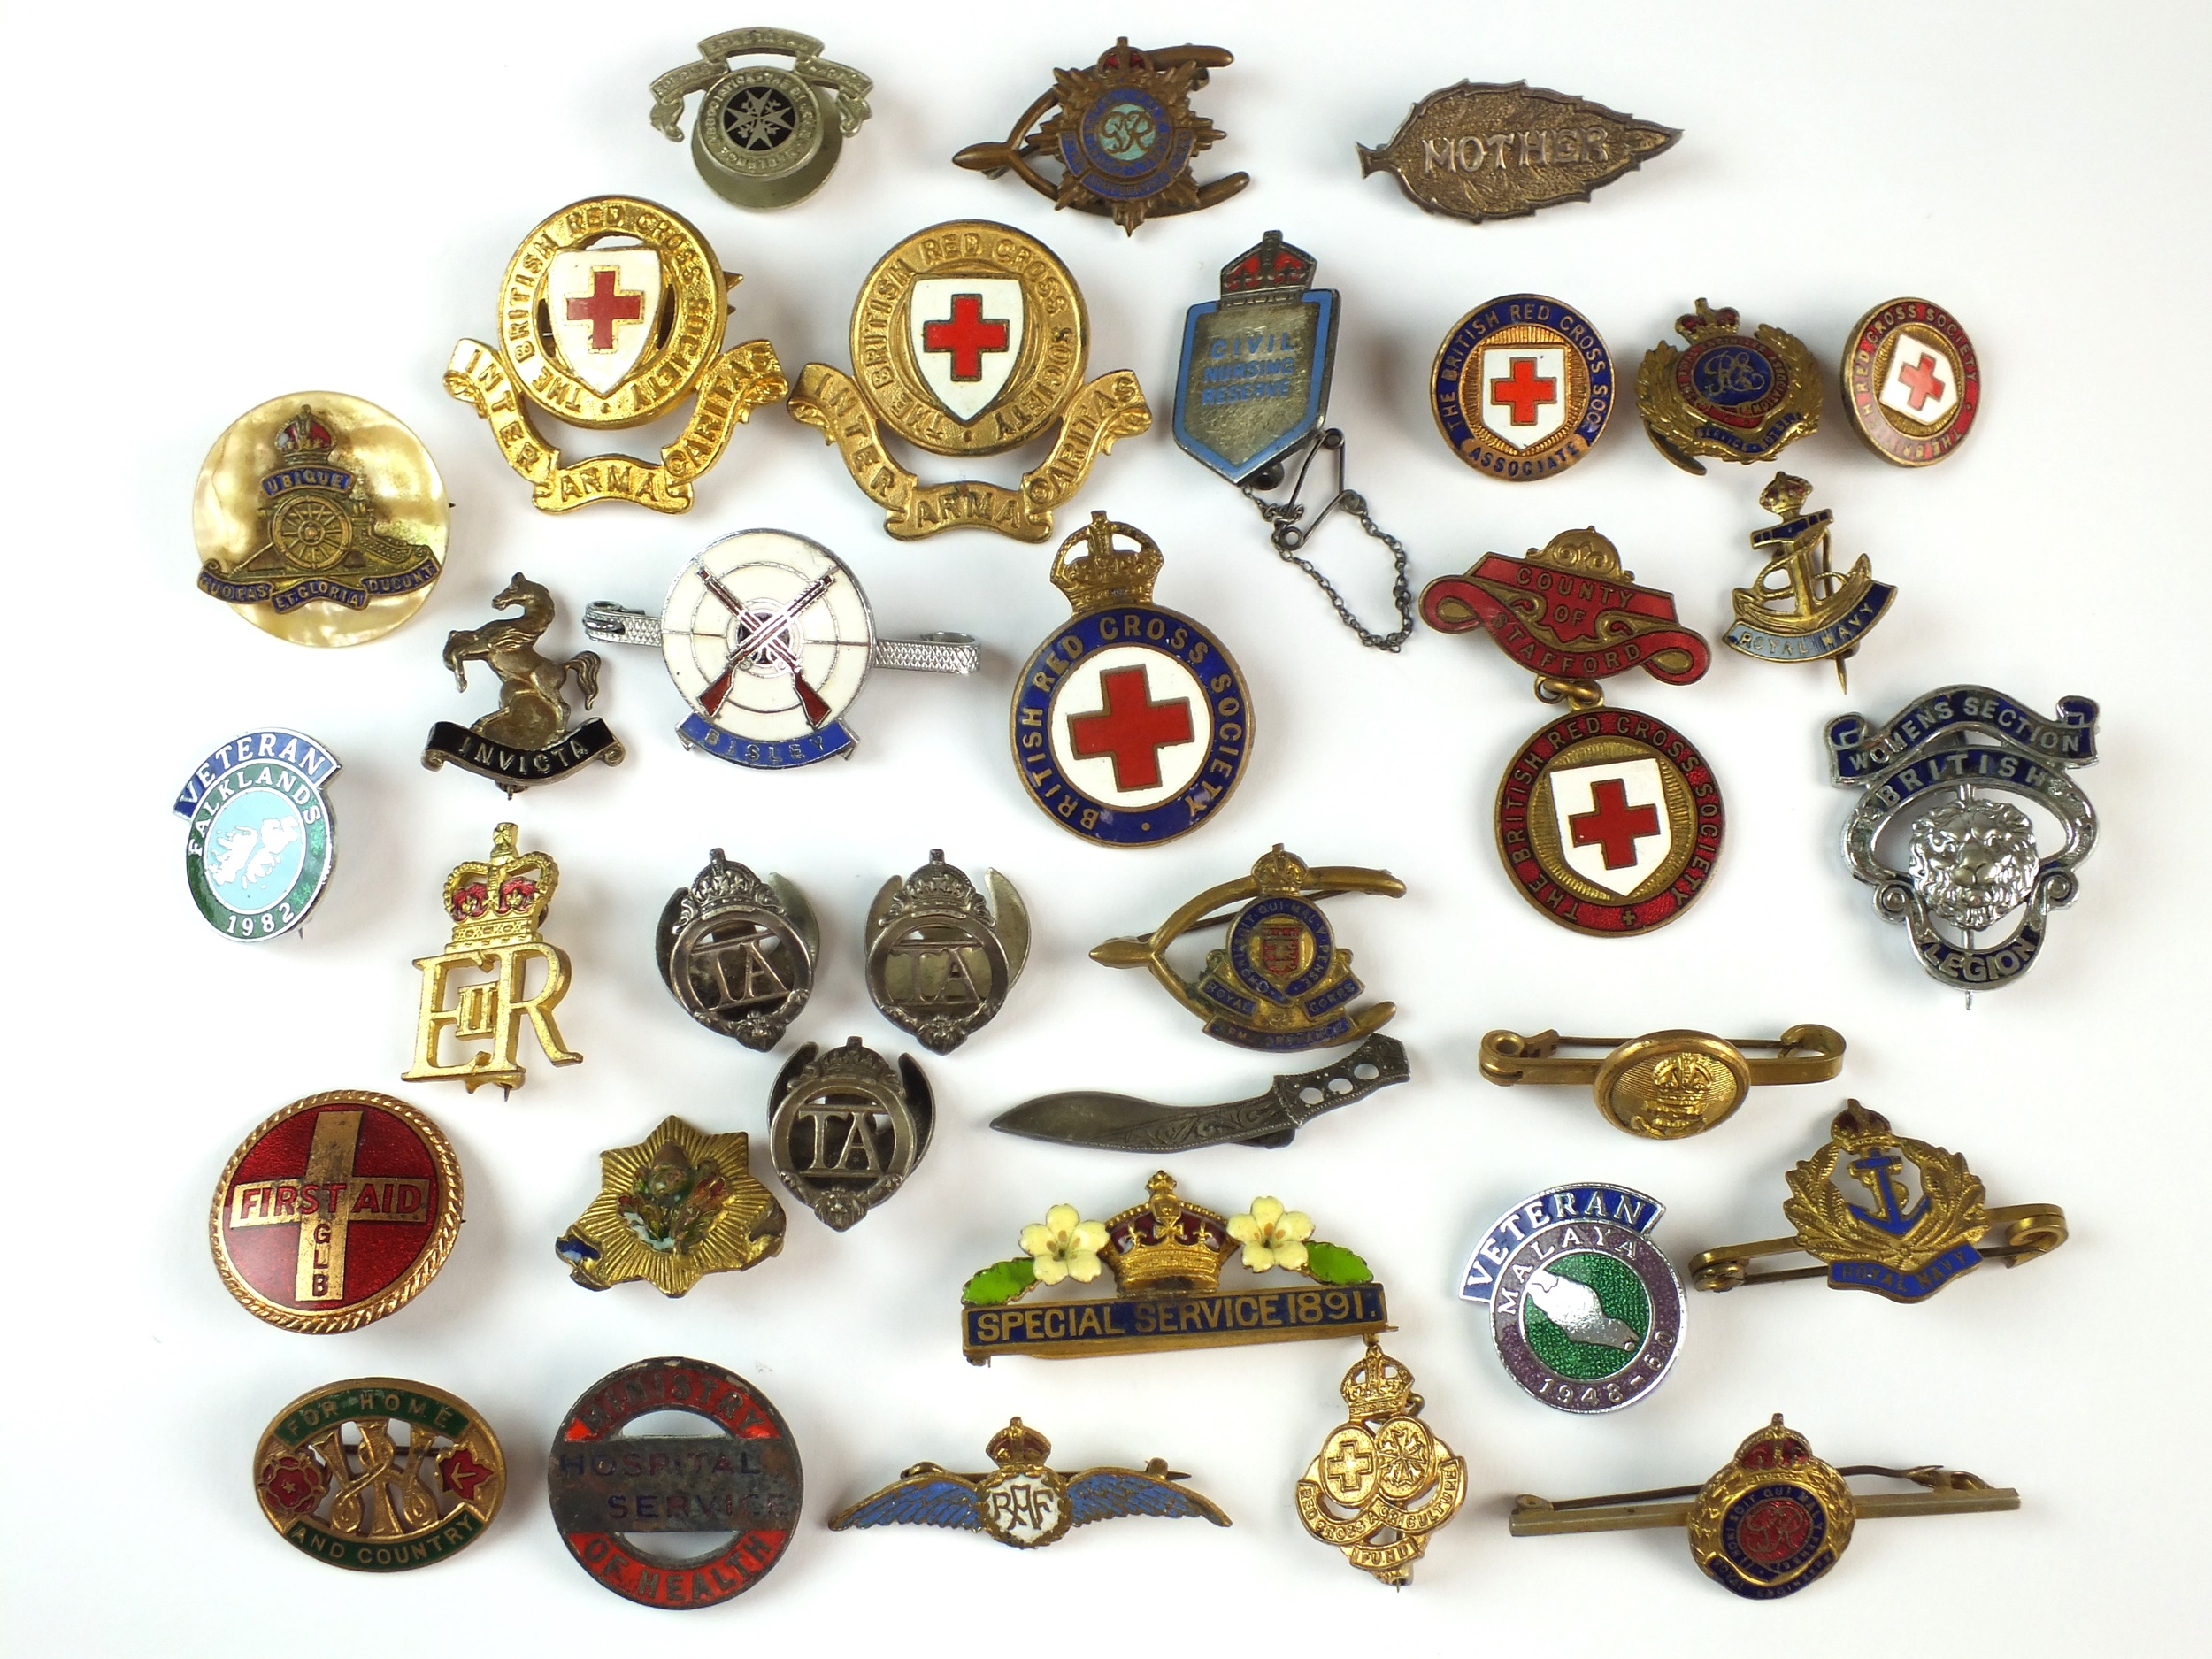 Association and Veteran's lapel badges and sweetheart brooches, including Red Cross